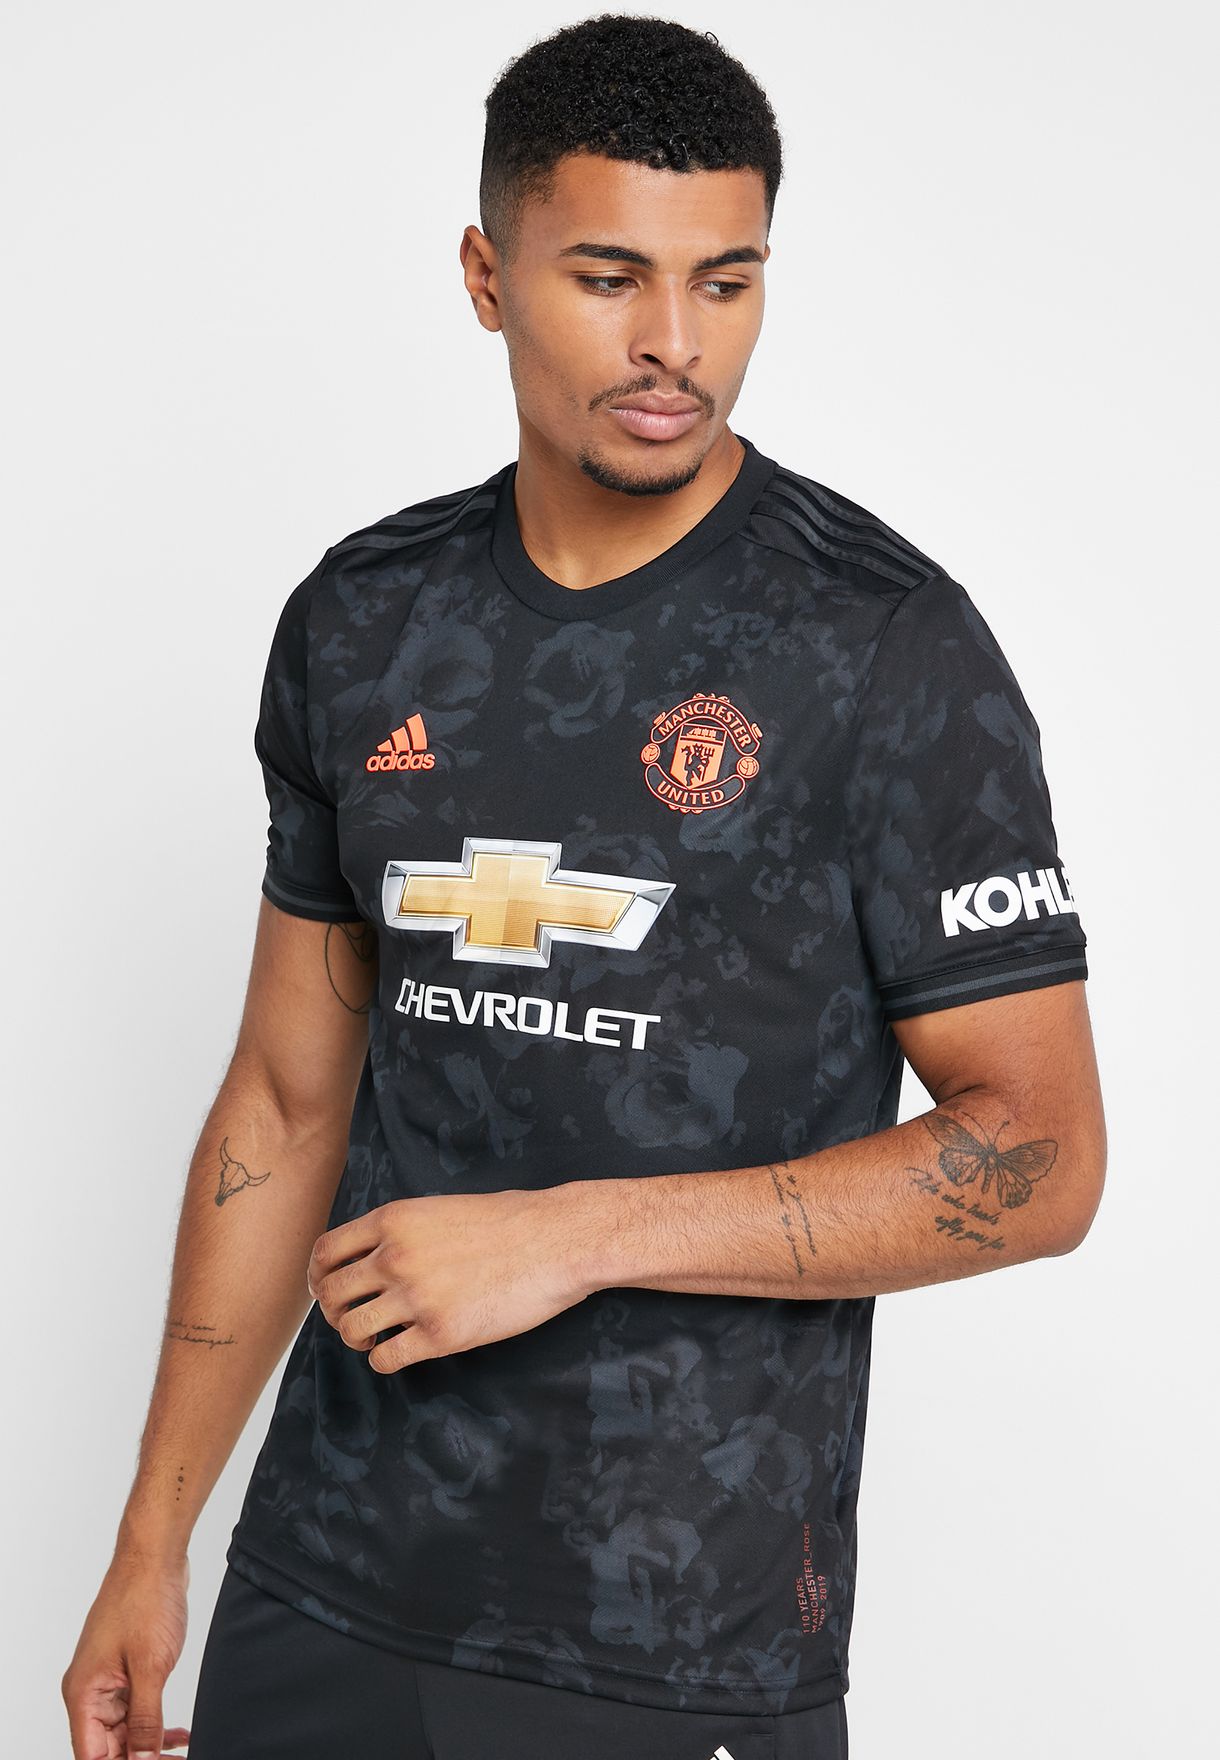 jersey 3rd manchester united